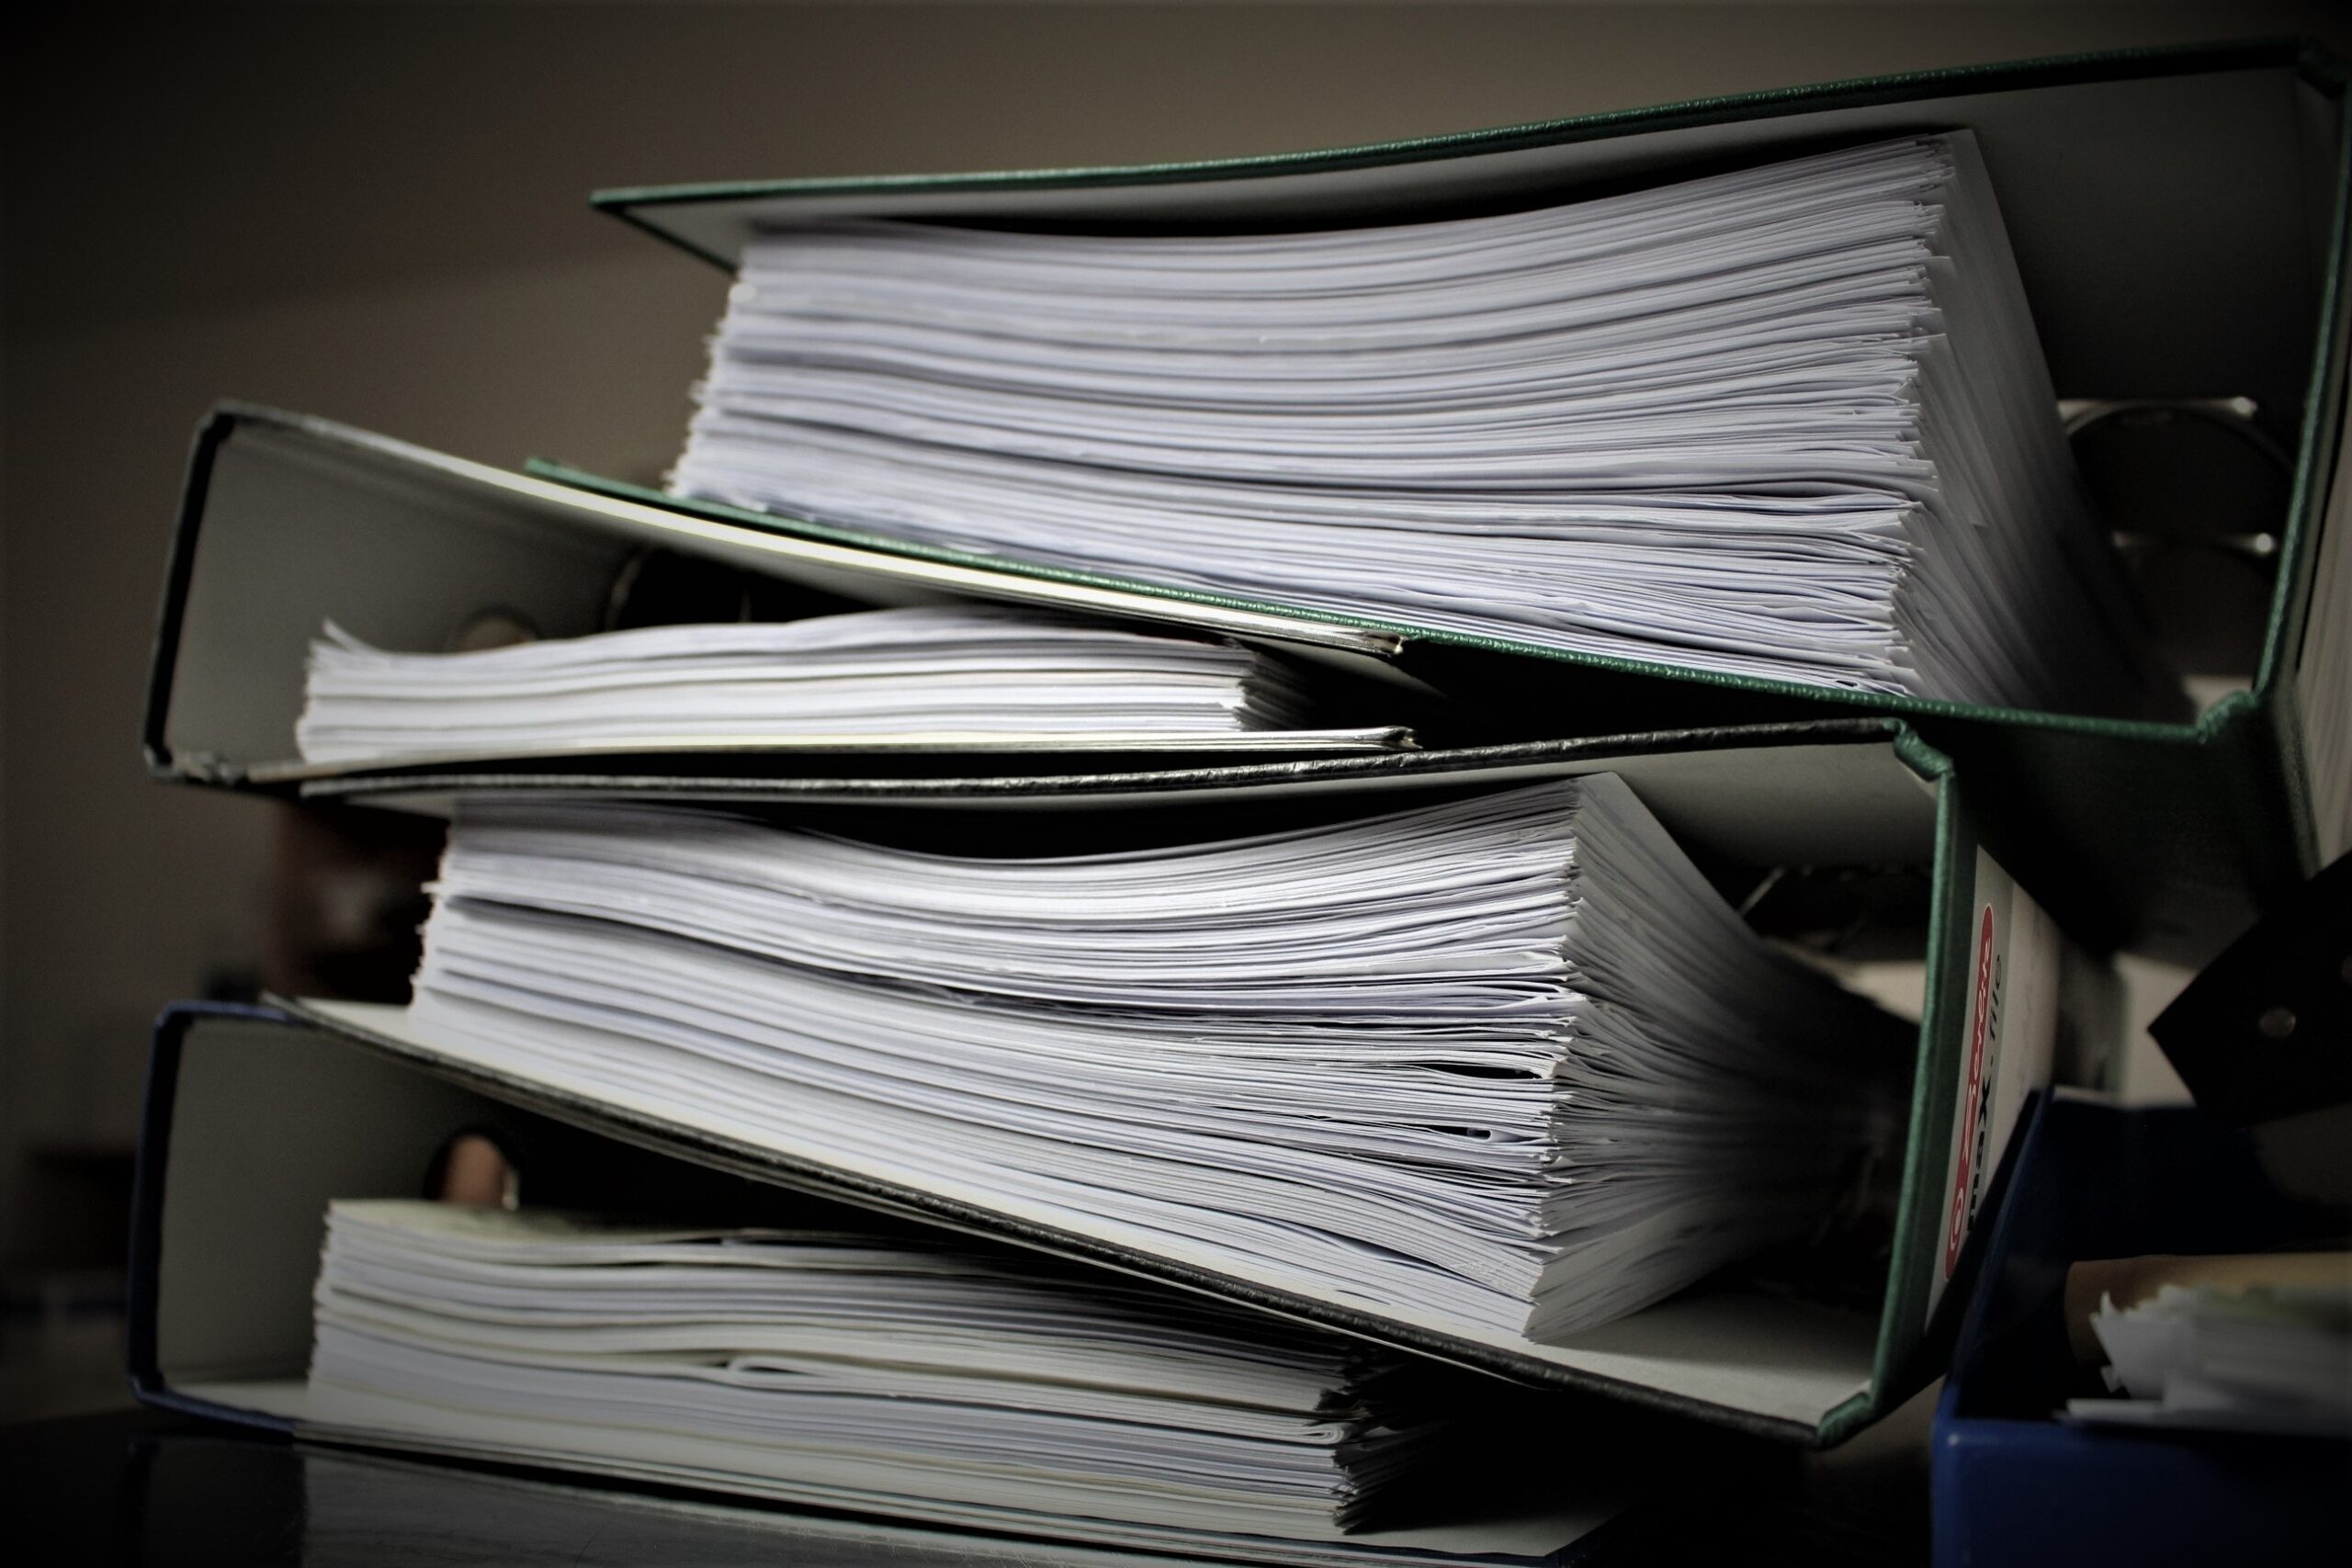 A close-up picture of four 3-ring binders filled with paper and all stacked on top of each other